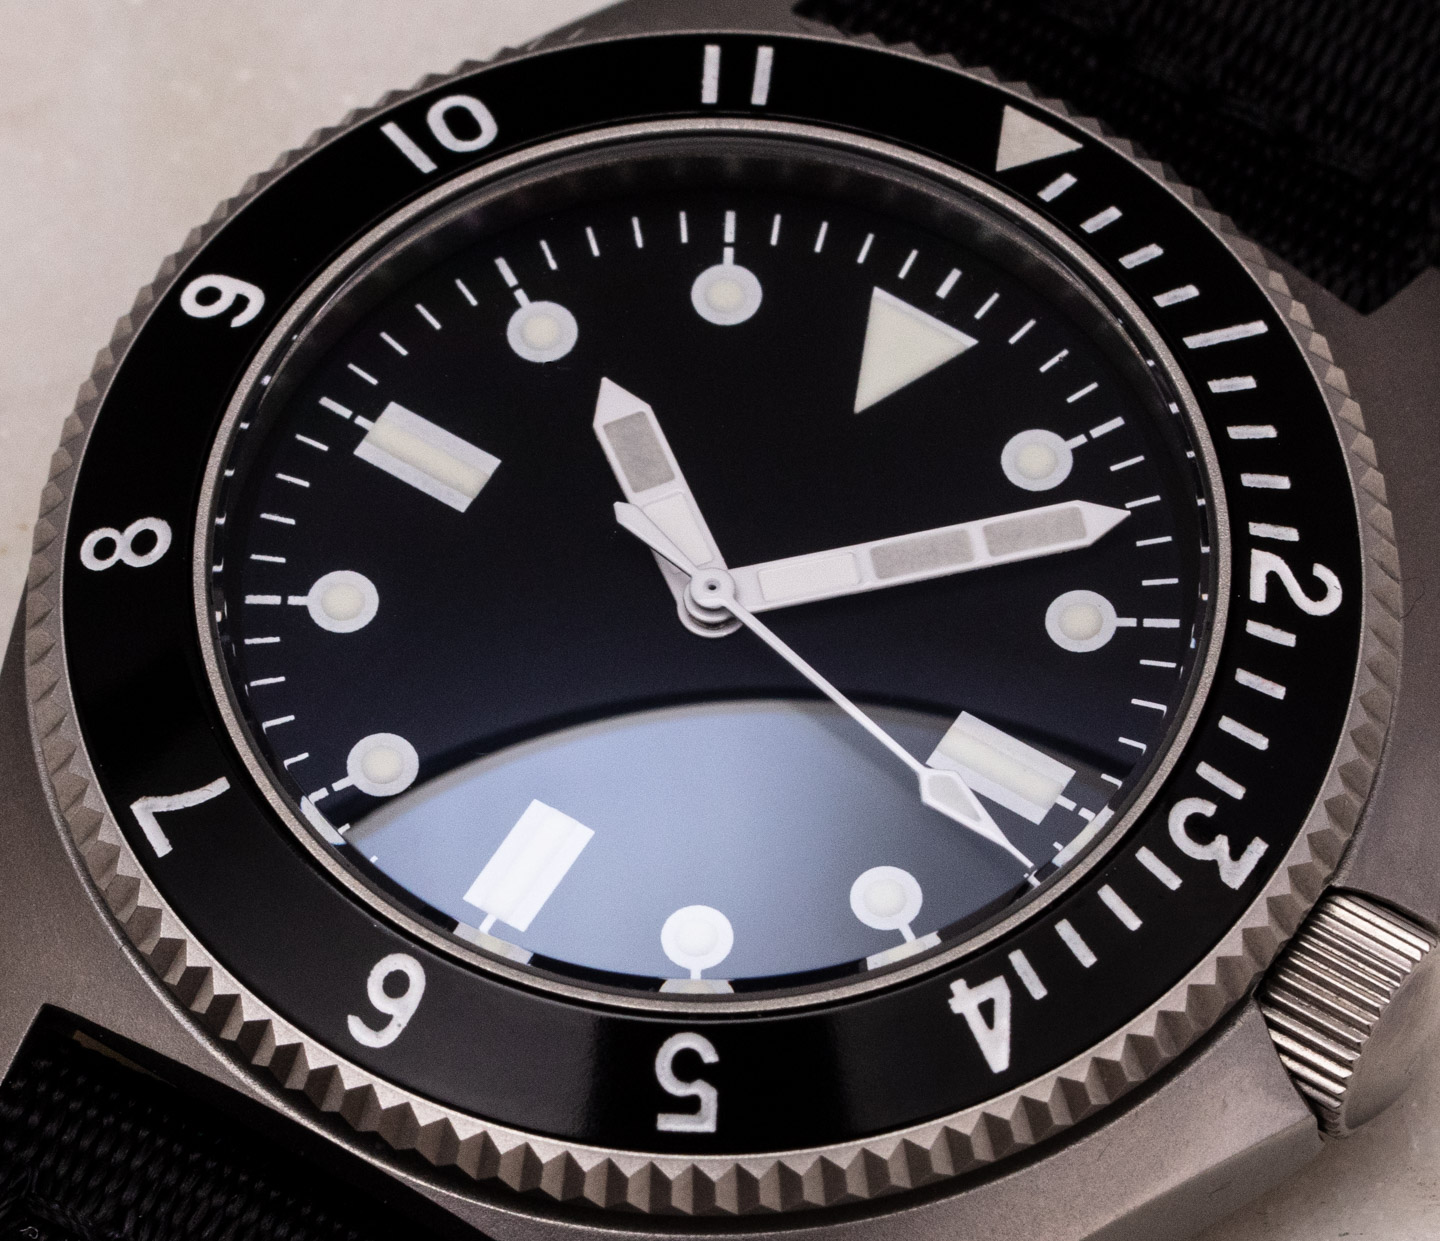 Hands-On: Benrus Type 1 Military Dive Watch | Ablogtowatch